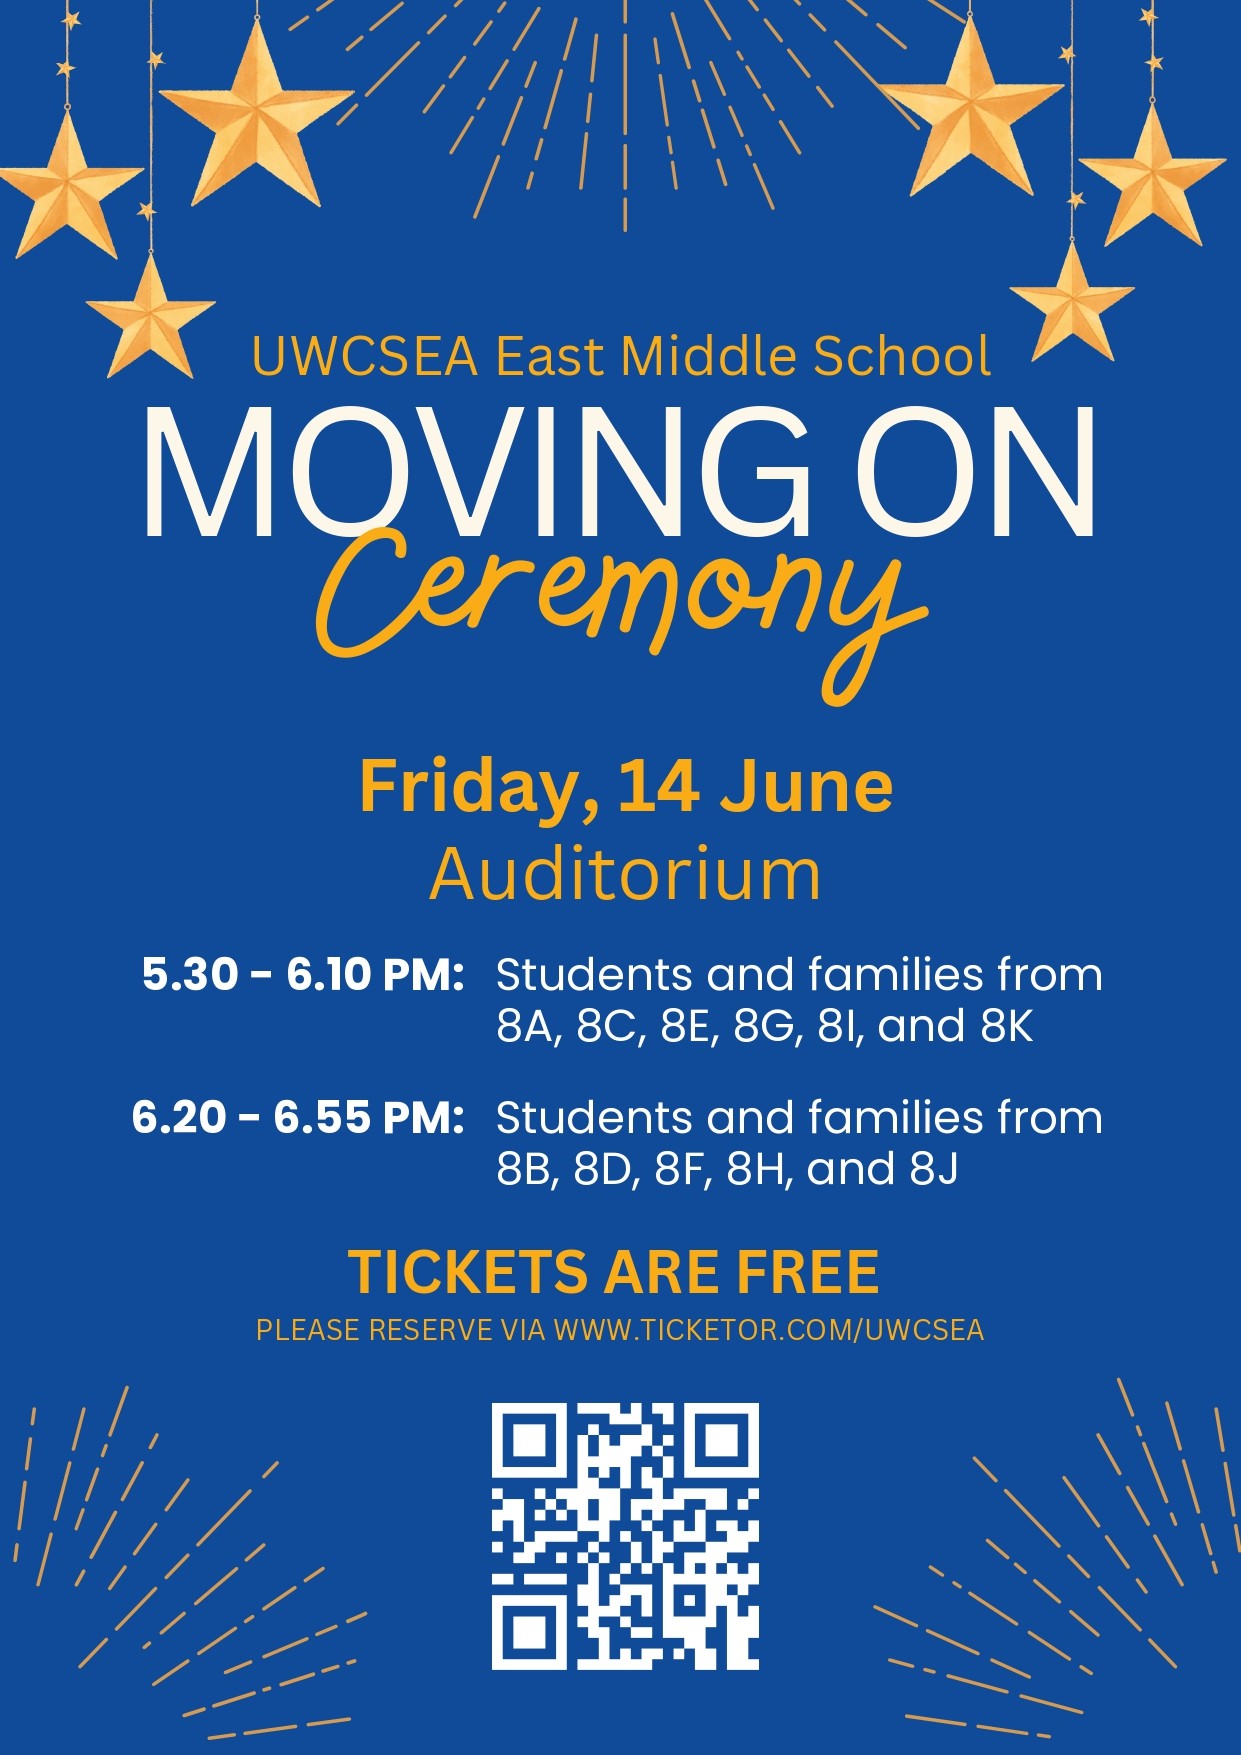 Grade 8 Moving On Assembly 1 (featuring G8 A, C, E, G, I, K)  on Jun 14, 17:30@UWCSEA East Auditorium - Pick a seat, Buy tickets and Get information on UWCSEA Ticket Hub uwcsea